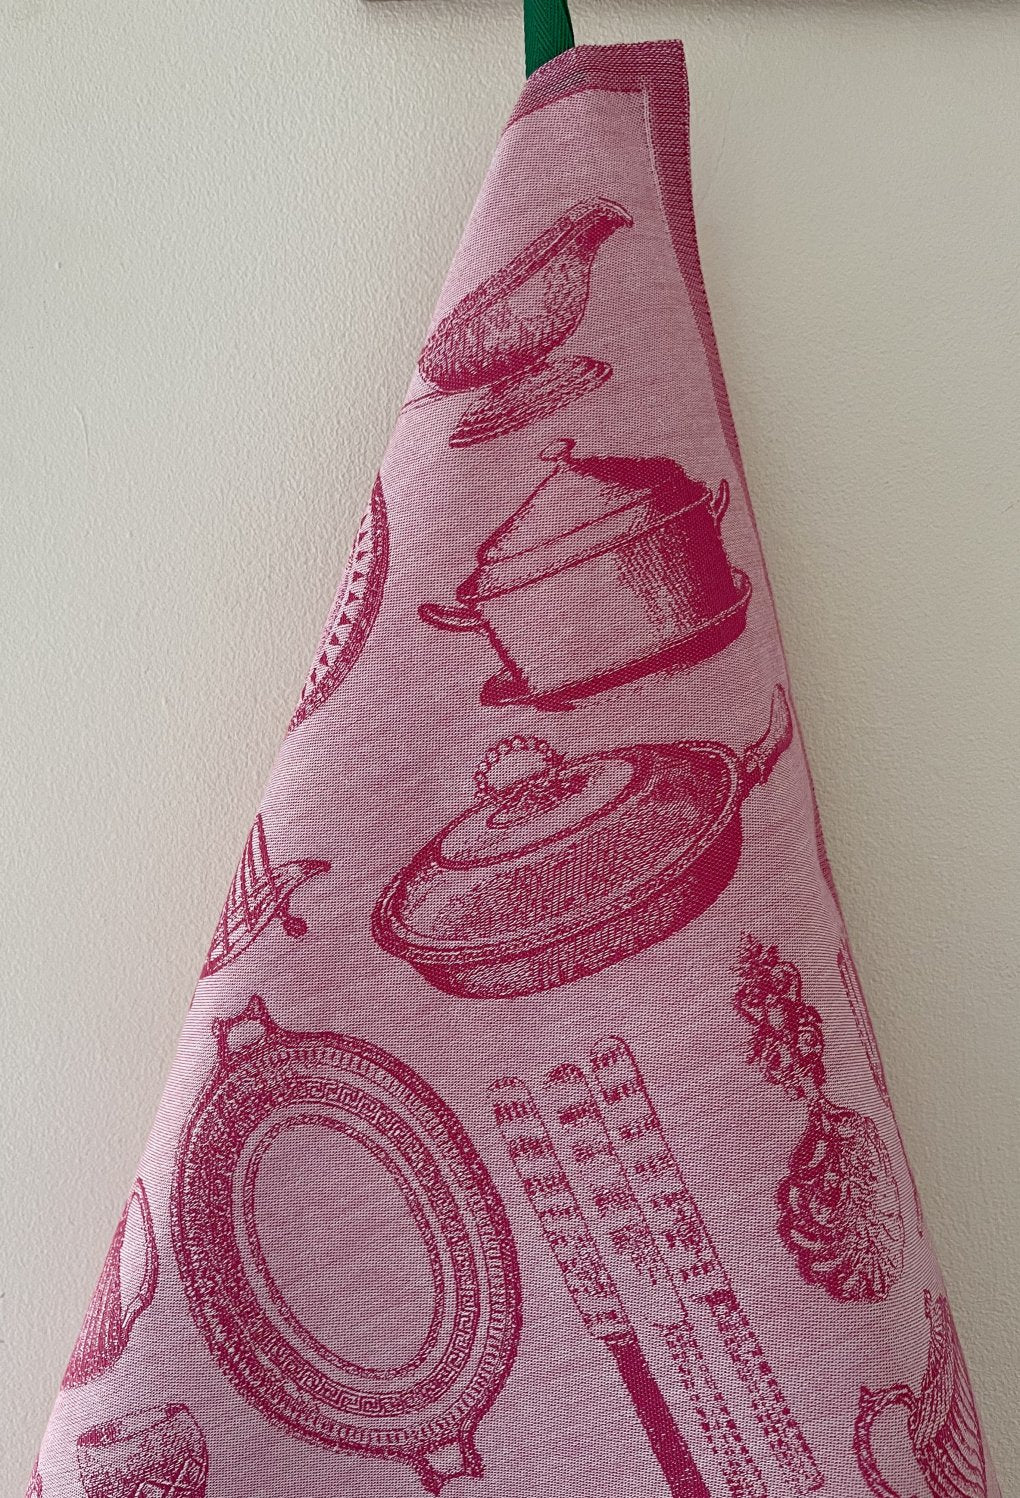 Jacquard Francais " A Table" (Pink), Woven cotton tea towel. Made in France.